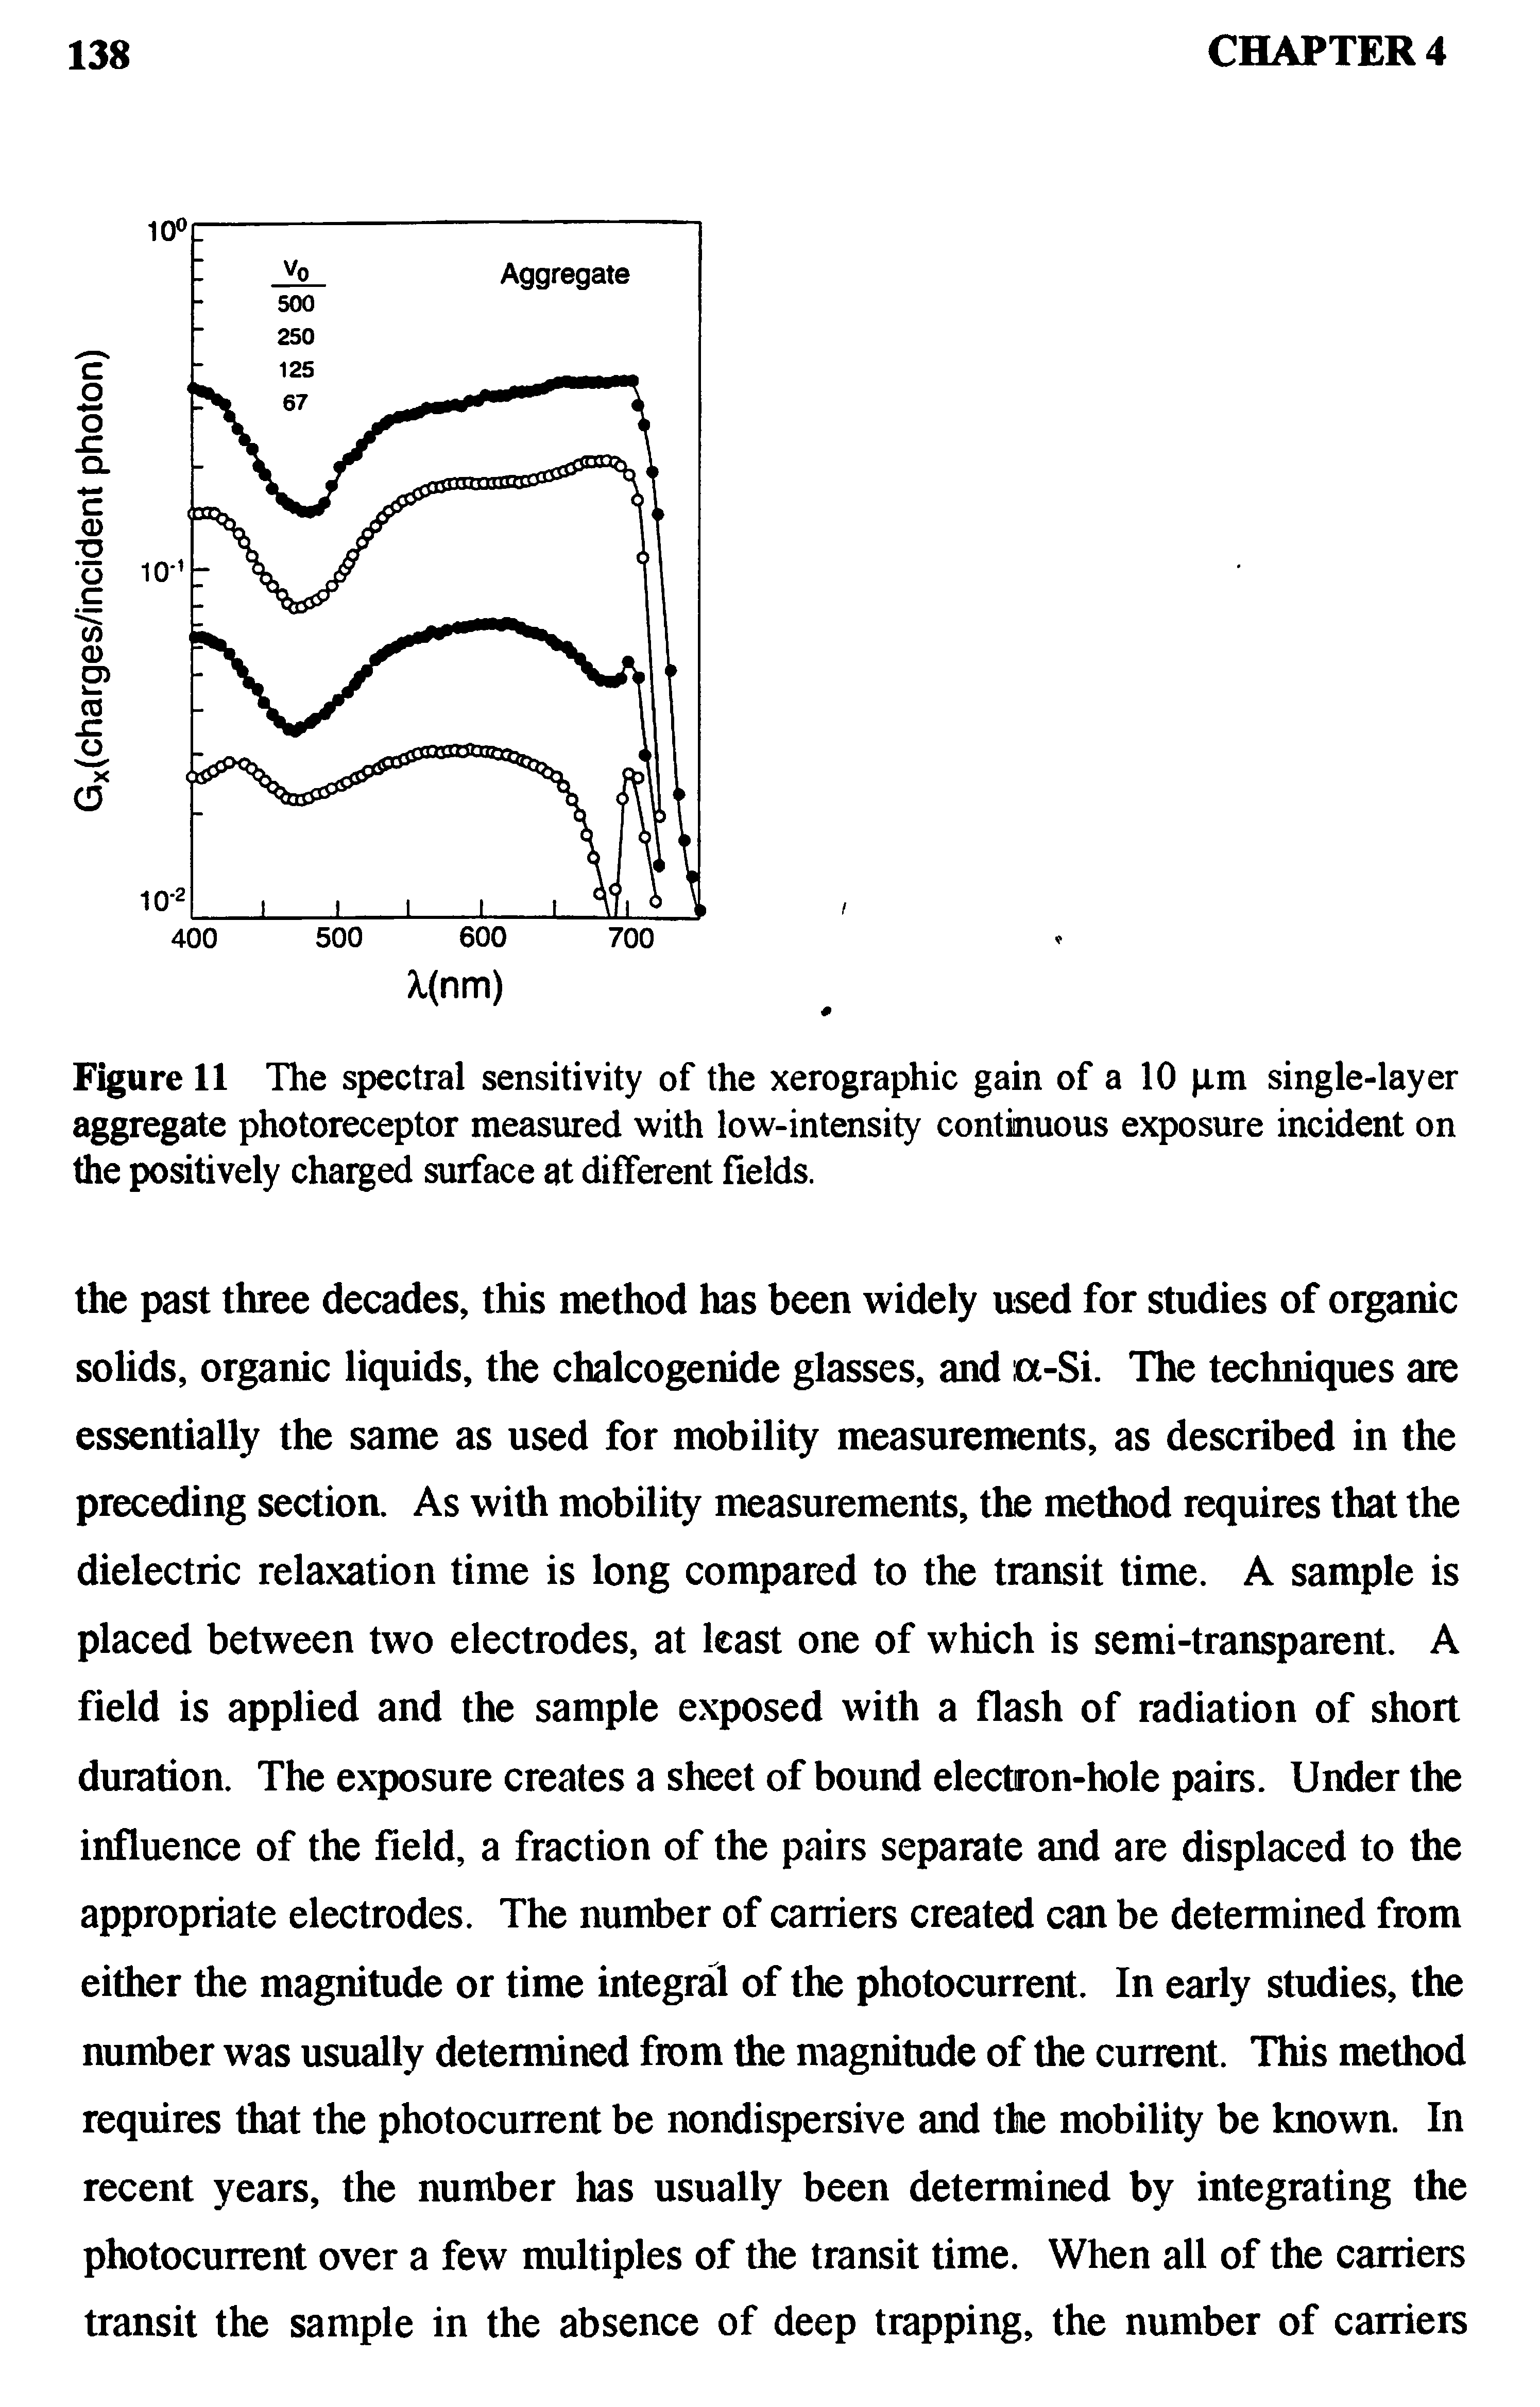 Figure 11 The spectral sensitivity of the xerographic gain of a 10 im single-layer aggregate photoreceptor measured with low-intensity continuous exposure incident on the positively charged surface at different fields.